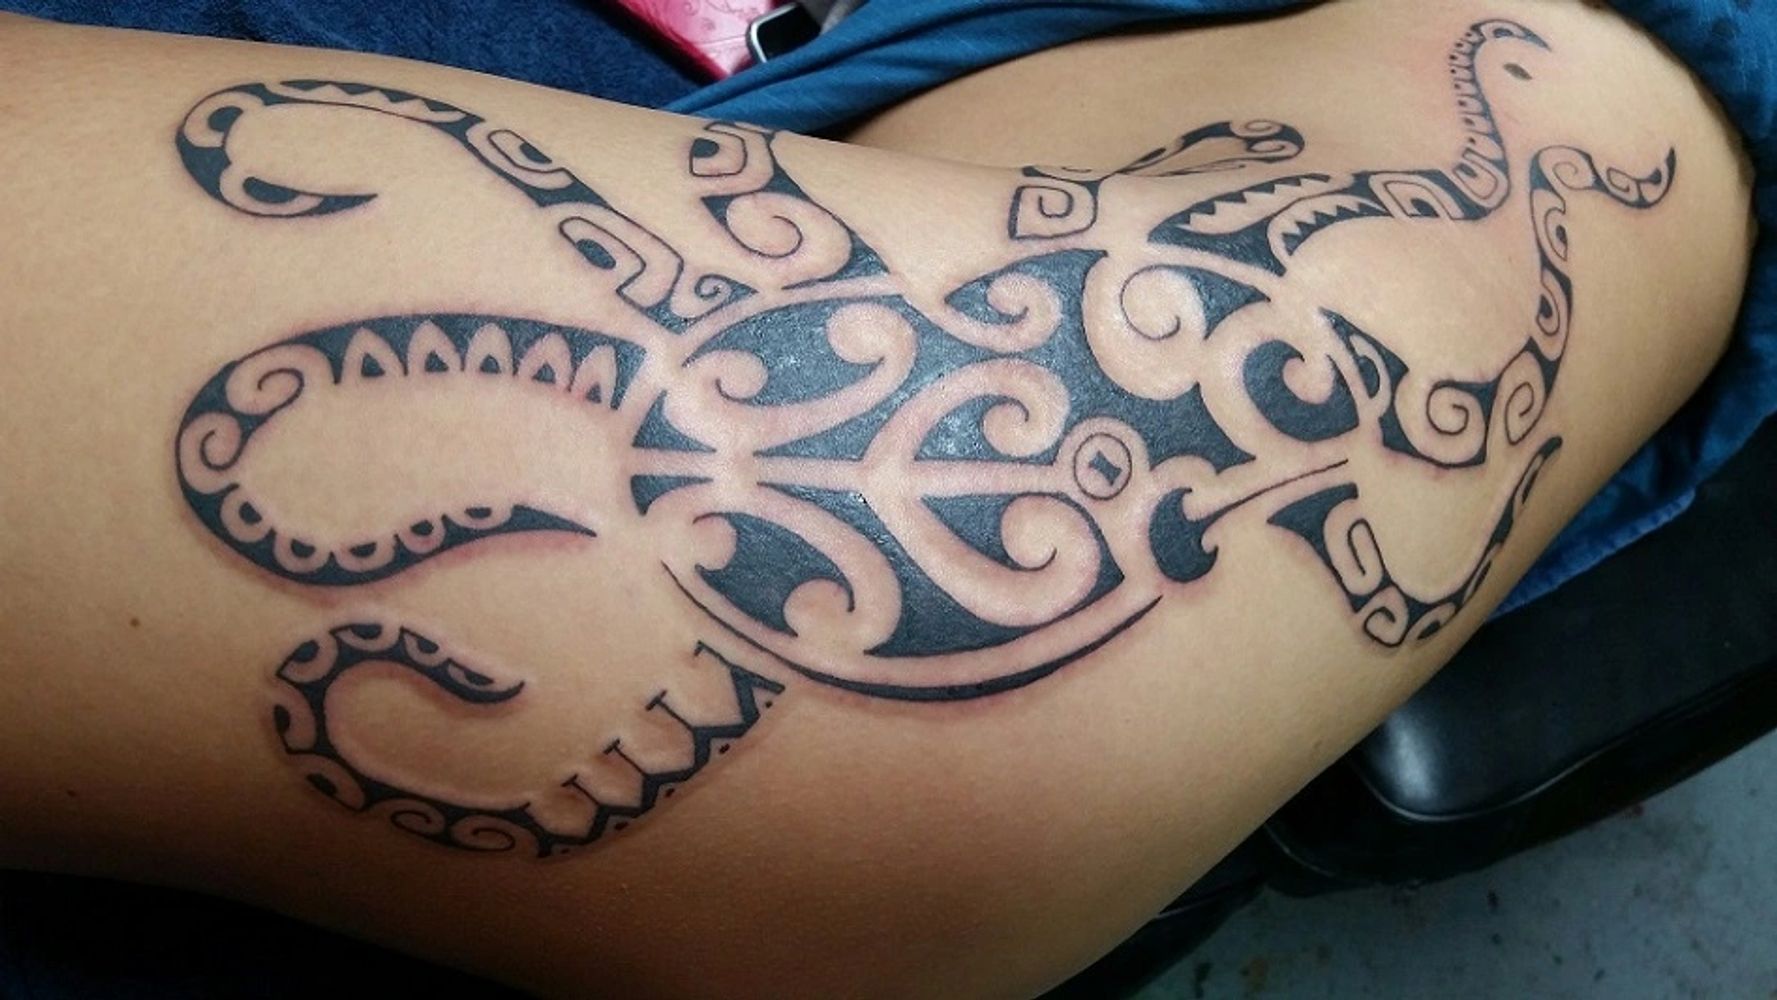 Polynesian octopus tattoo on hip and ribs by Rockwood.